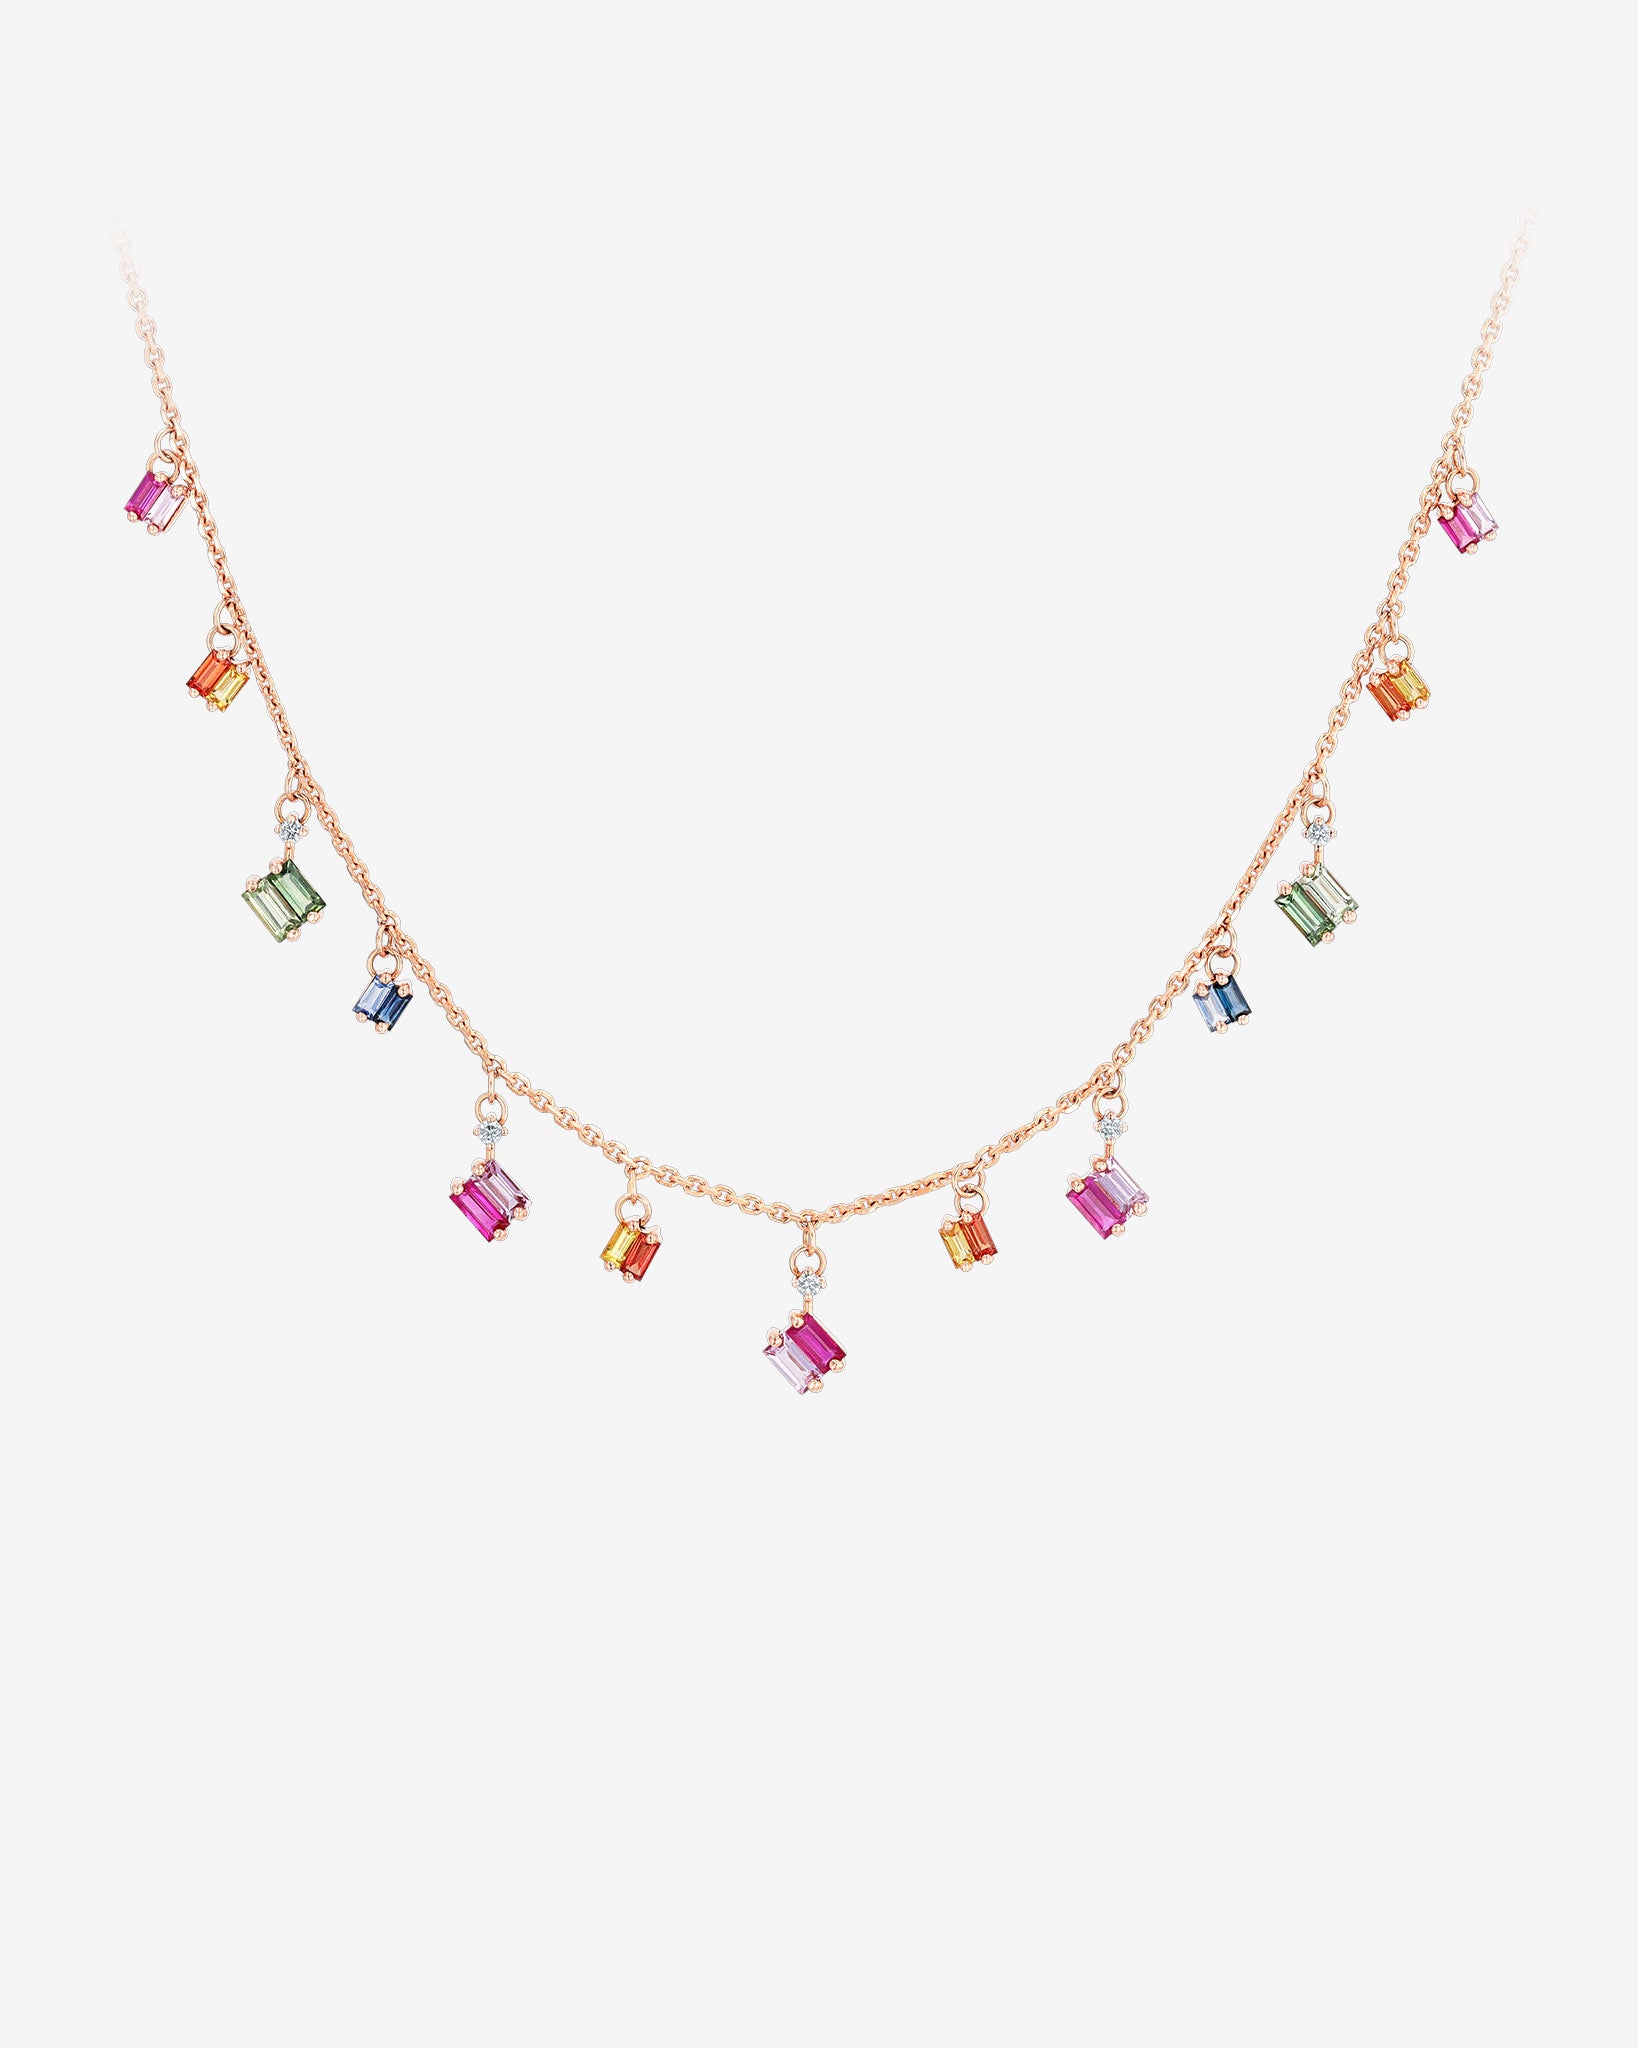 Suzanne Kalan Bold Rainbow Sapphire Cascade Necklace in 18k rose gold